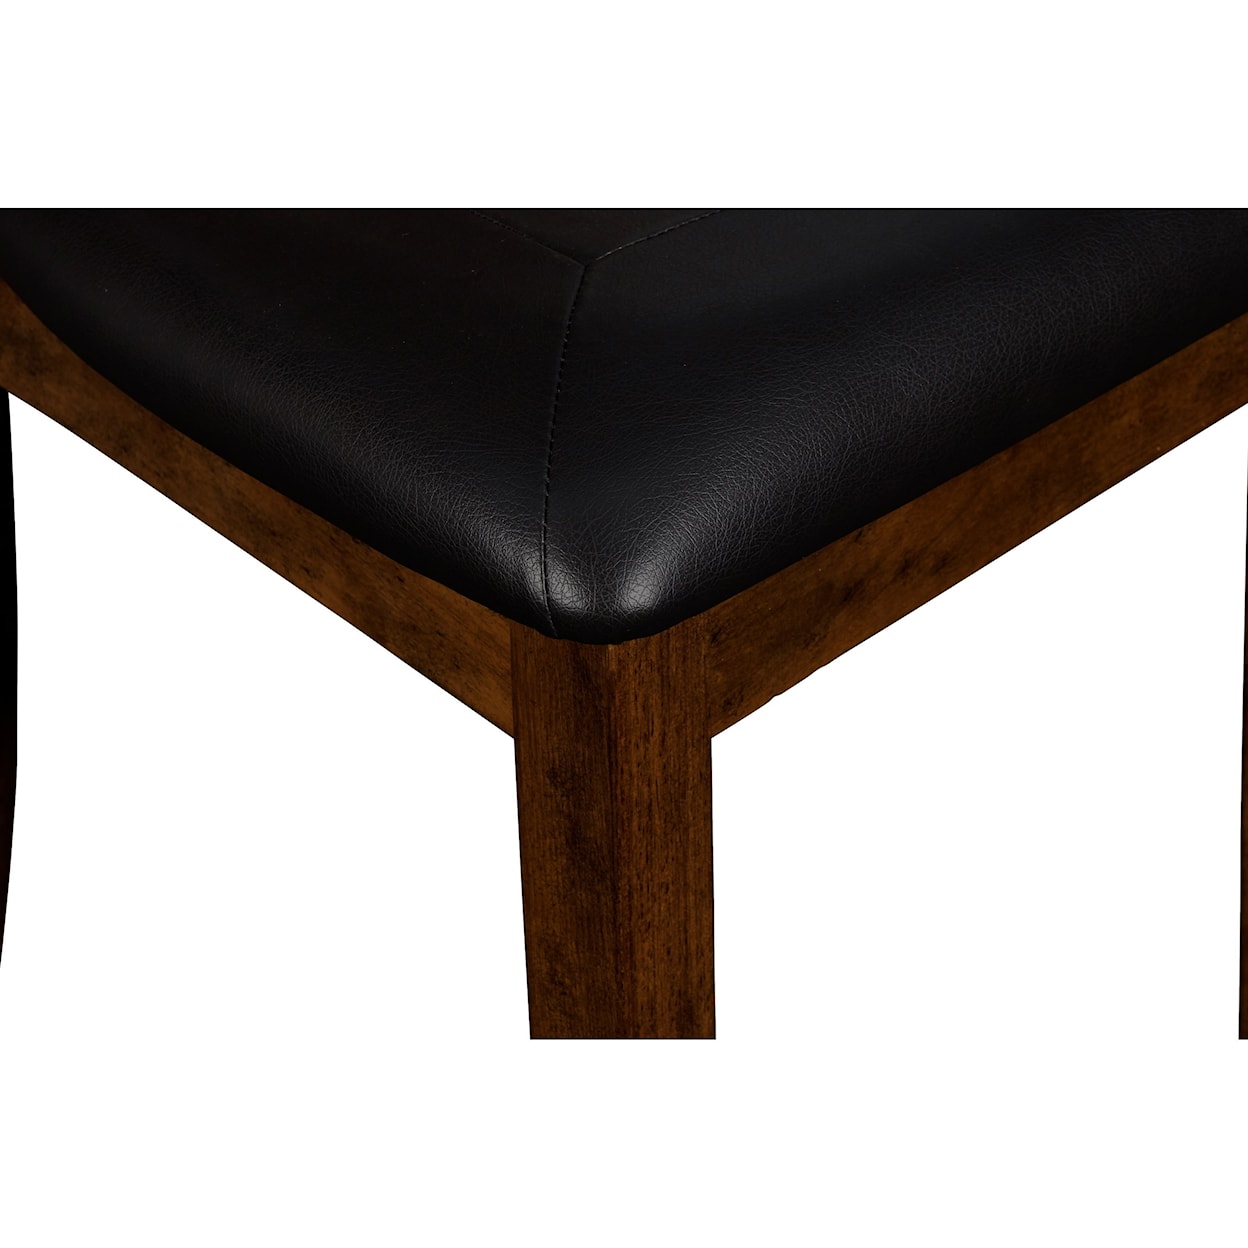 New Classic Furniture Gia Dining Chair